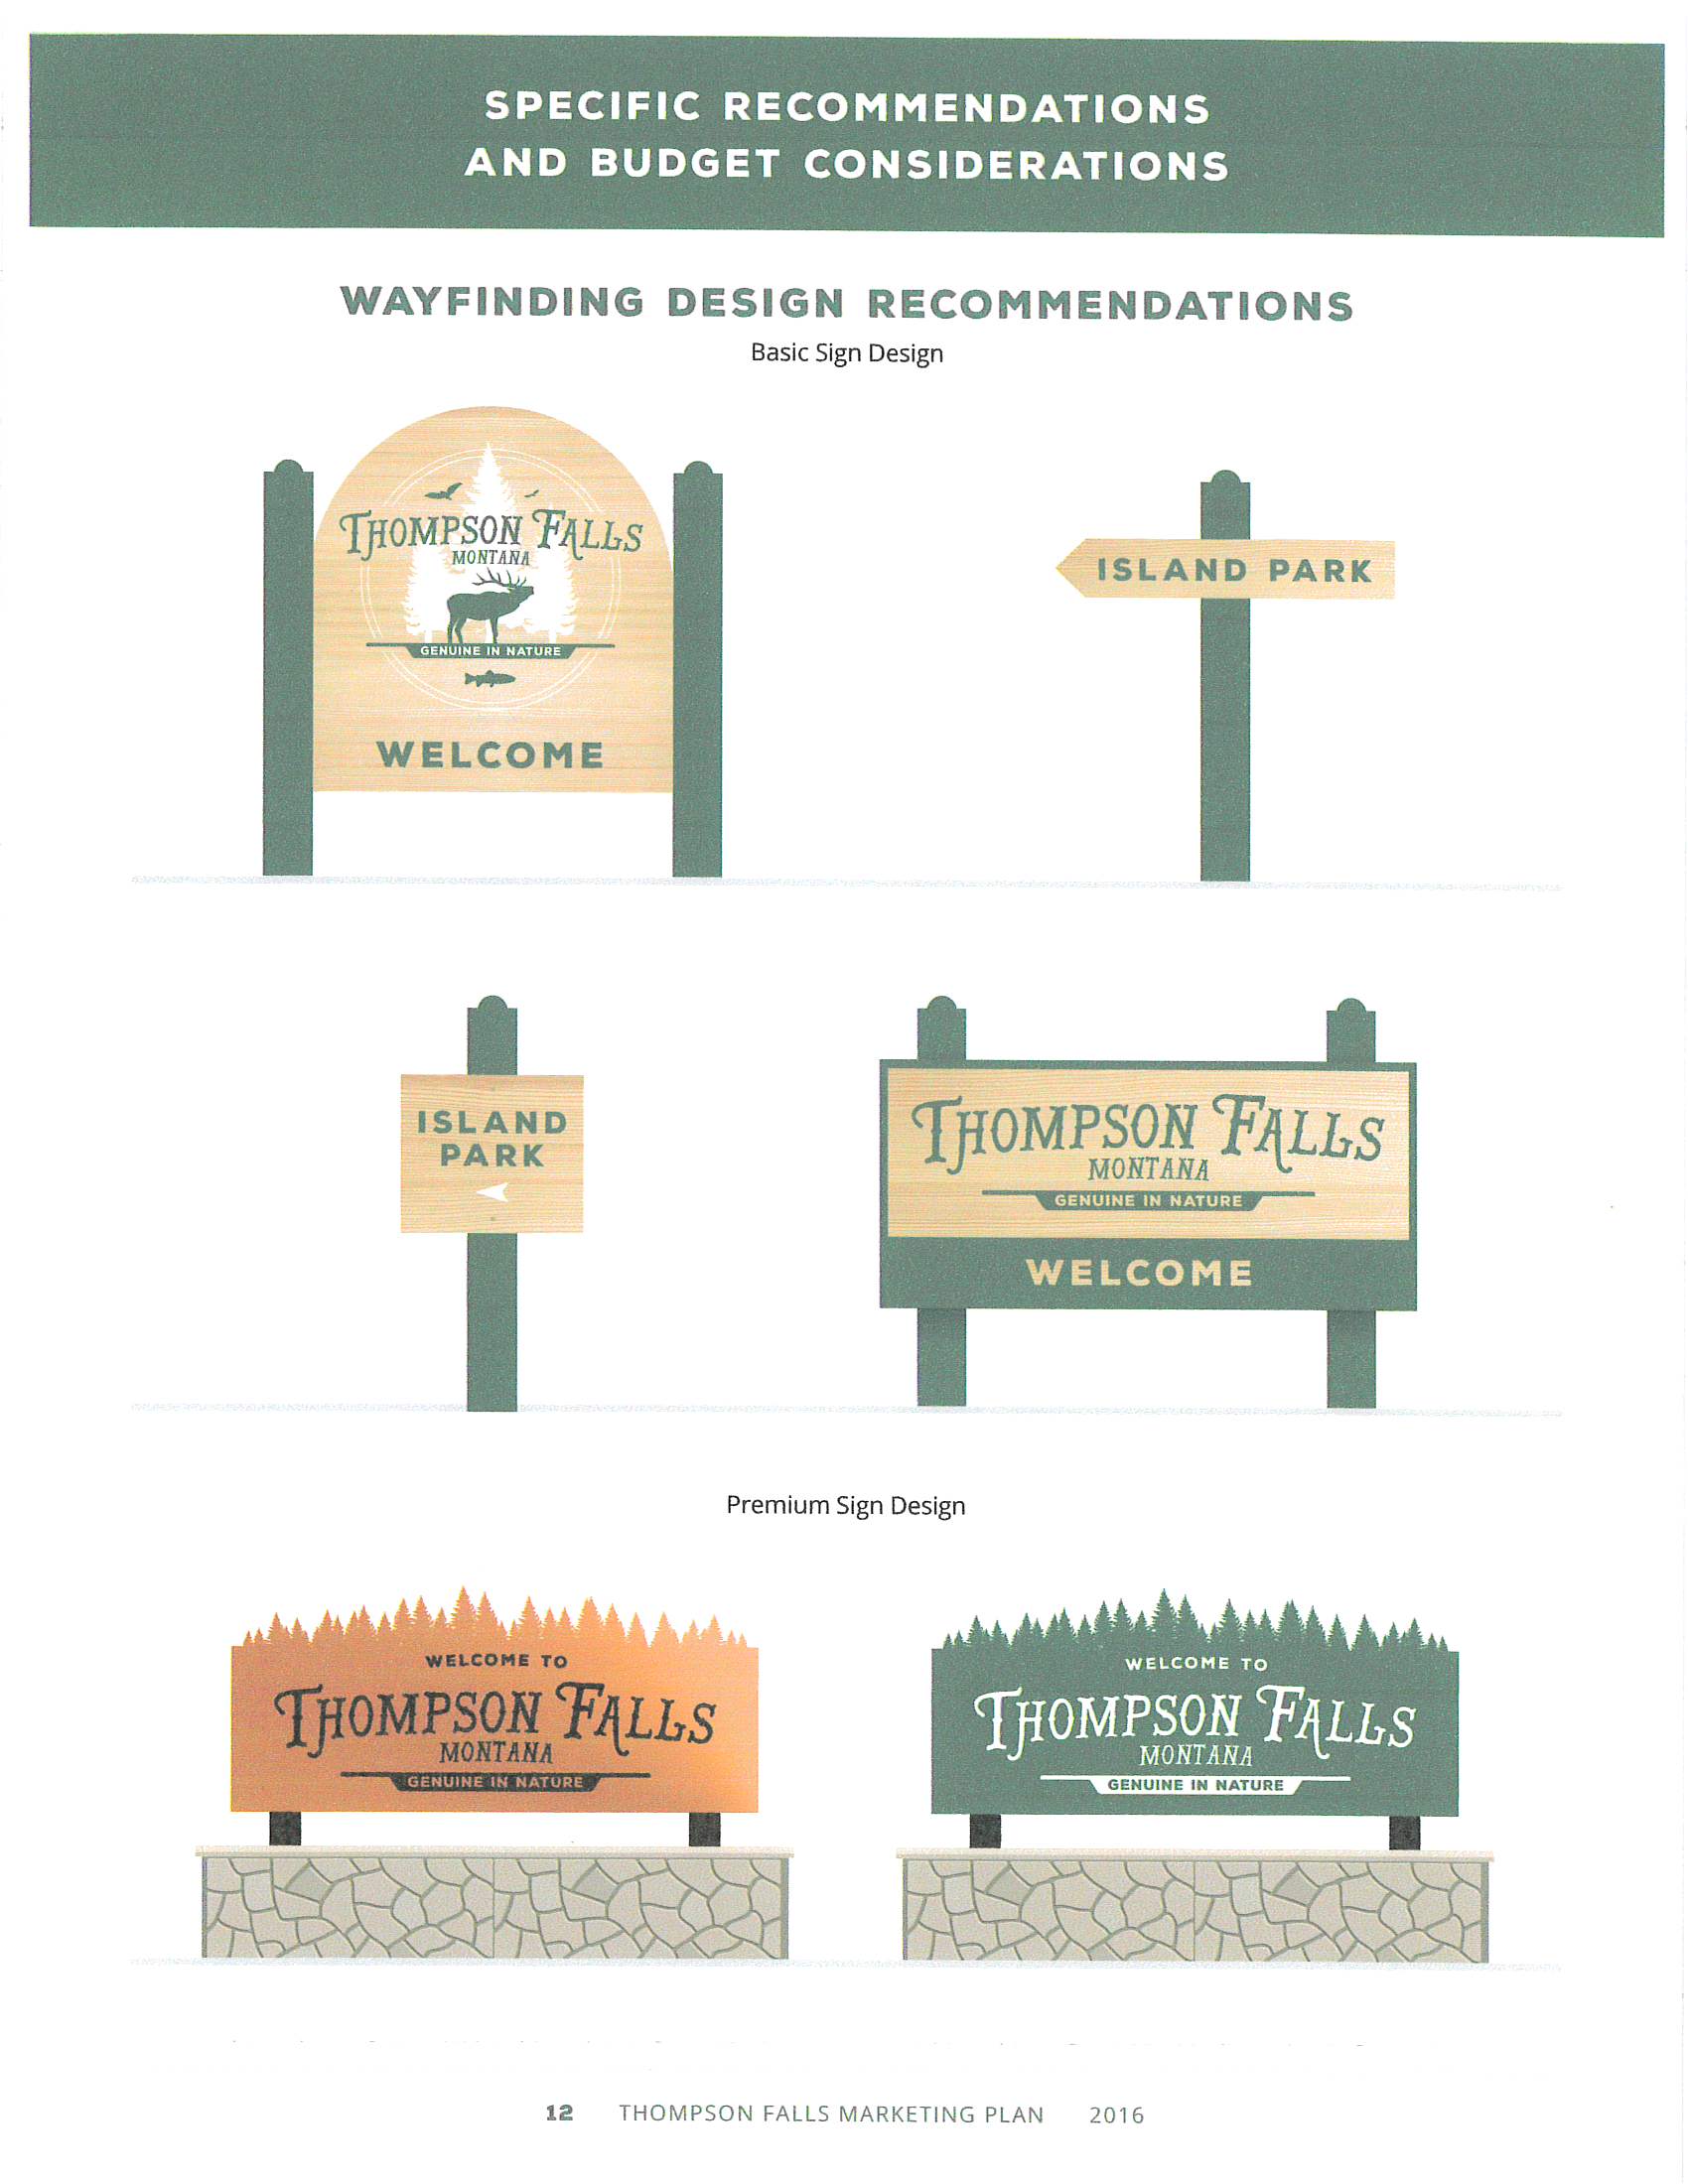 Thompson Falls Wayfinding Recommendations